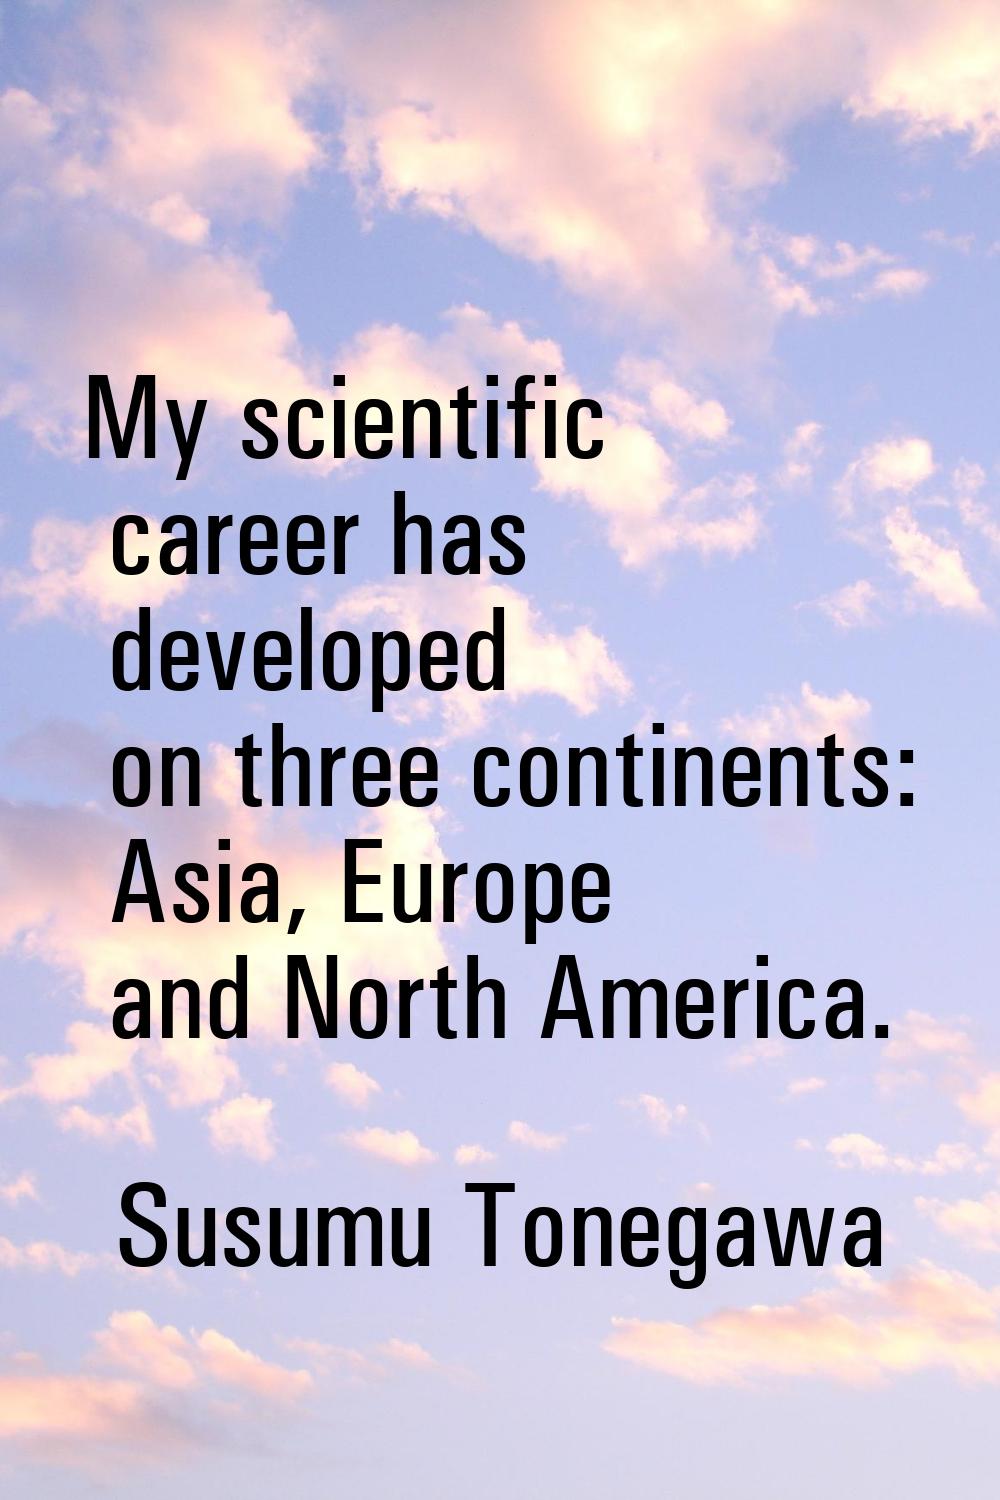 My scientific career has developed on three continents: Asia, Europe and North America.